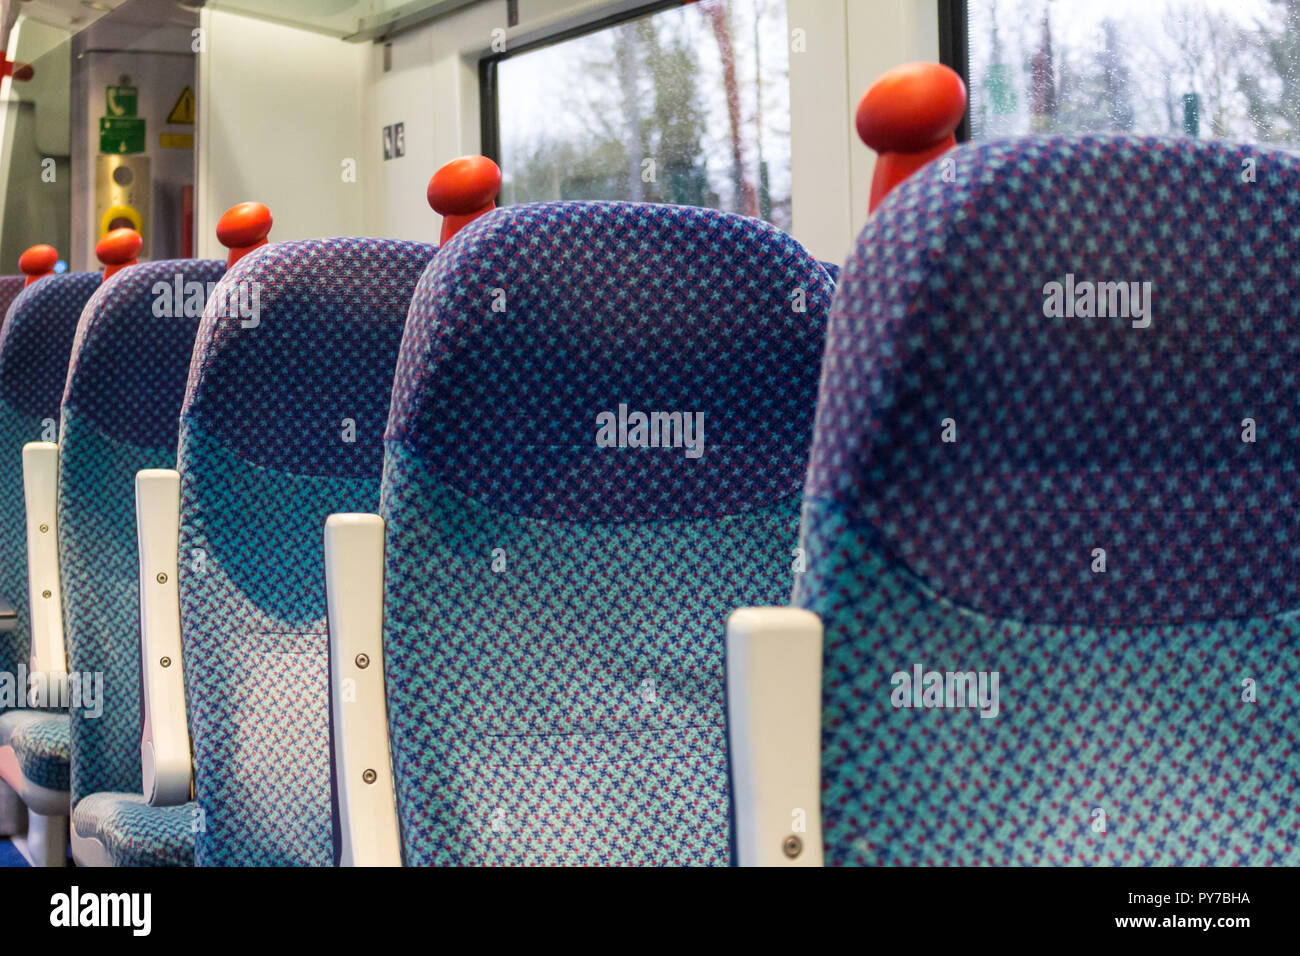 Row of empty seats on a train carriage with red grip handles. NI Railways, Translink, Belfast, N.Ireland. Stock Photo